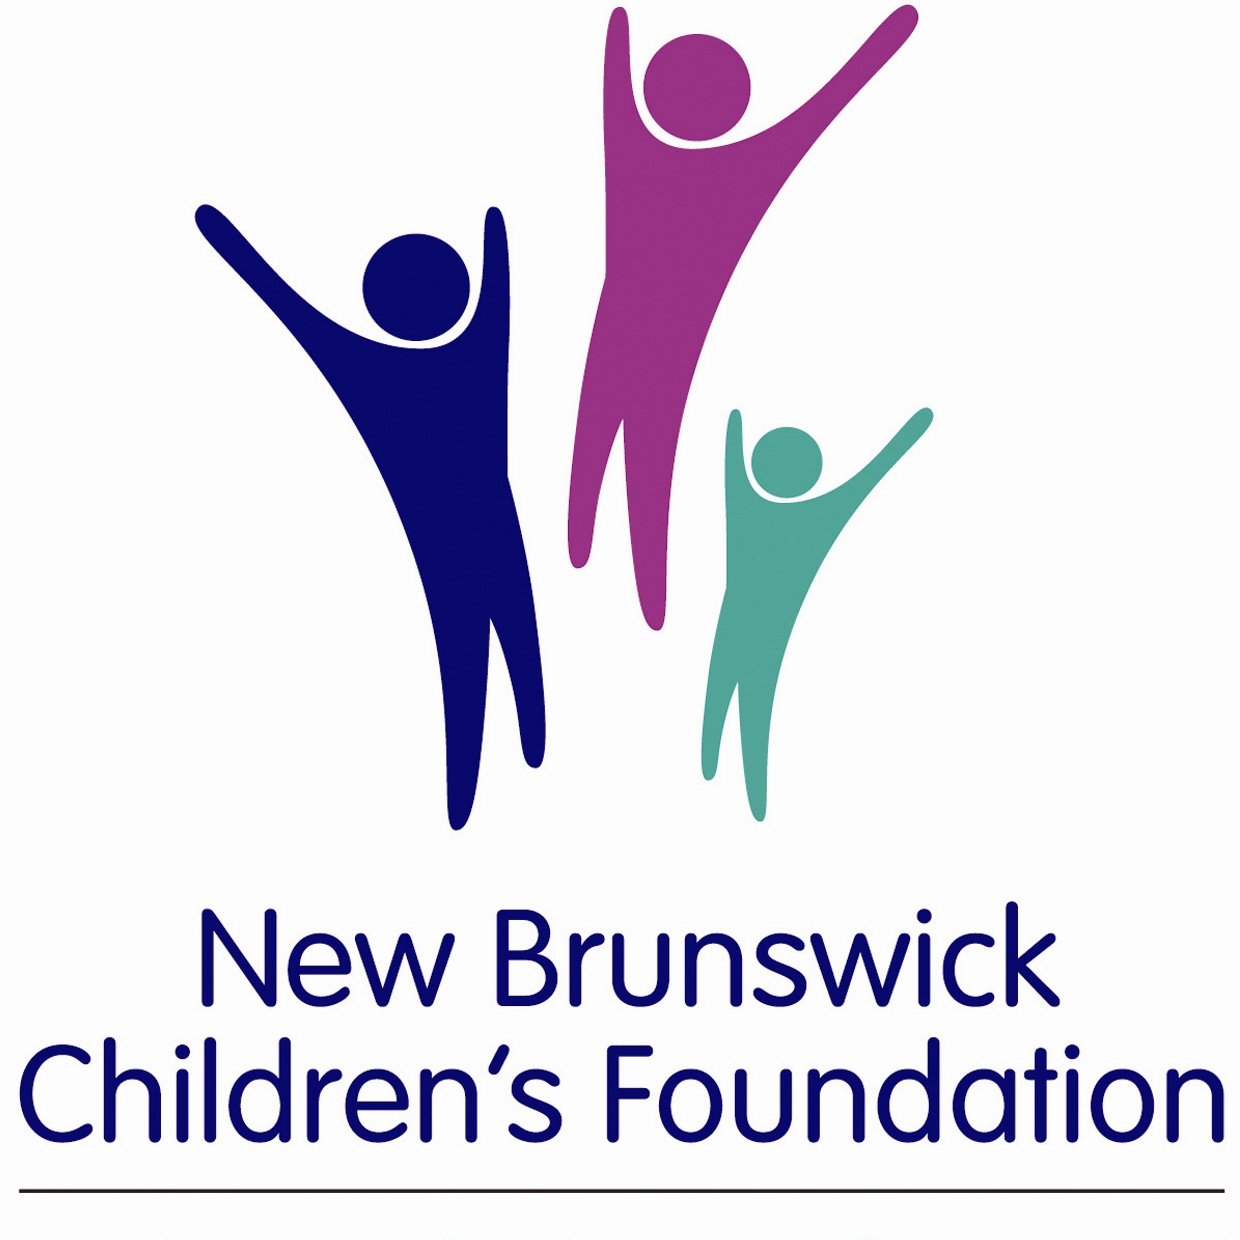 The New Brunswick Children’s Foundation’s mission is to help children succeed by financially assisting charities that share a common vision of helping children.